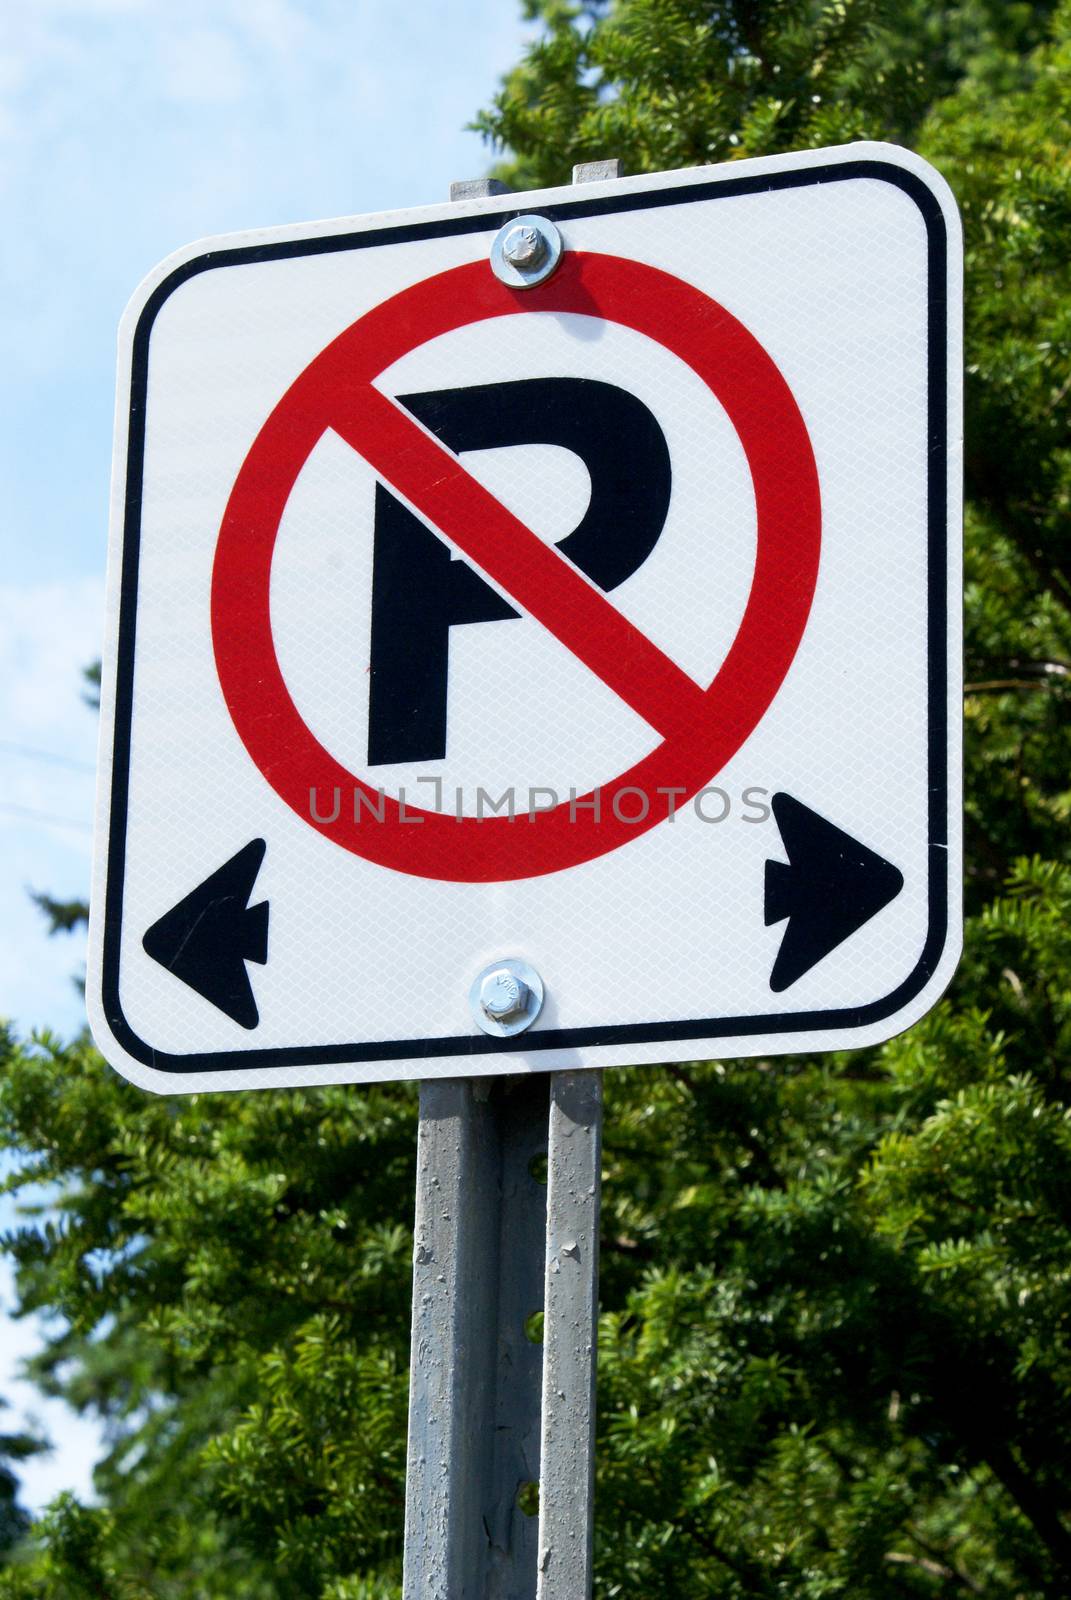 A vertical closeup image focused on a no parking sign used in Canadian traffic laws.